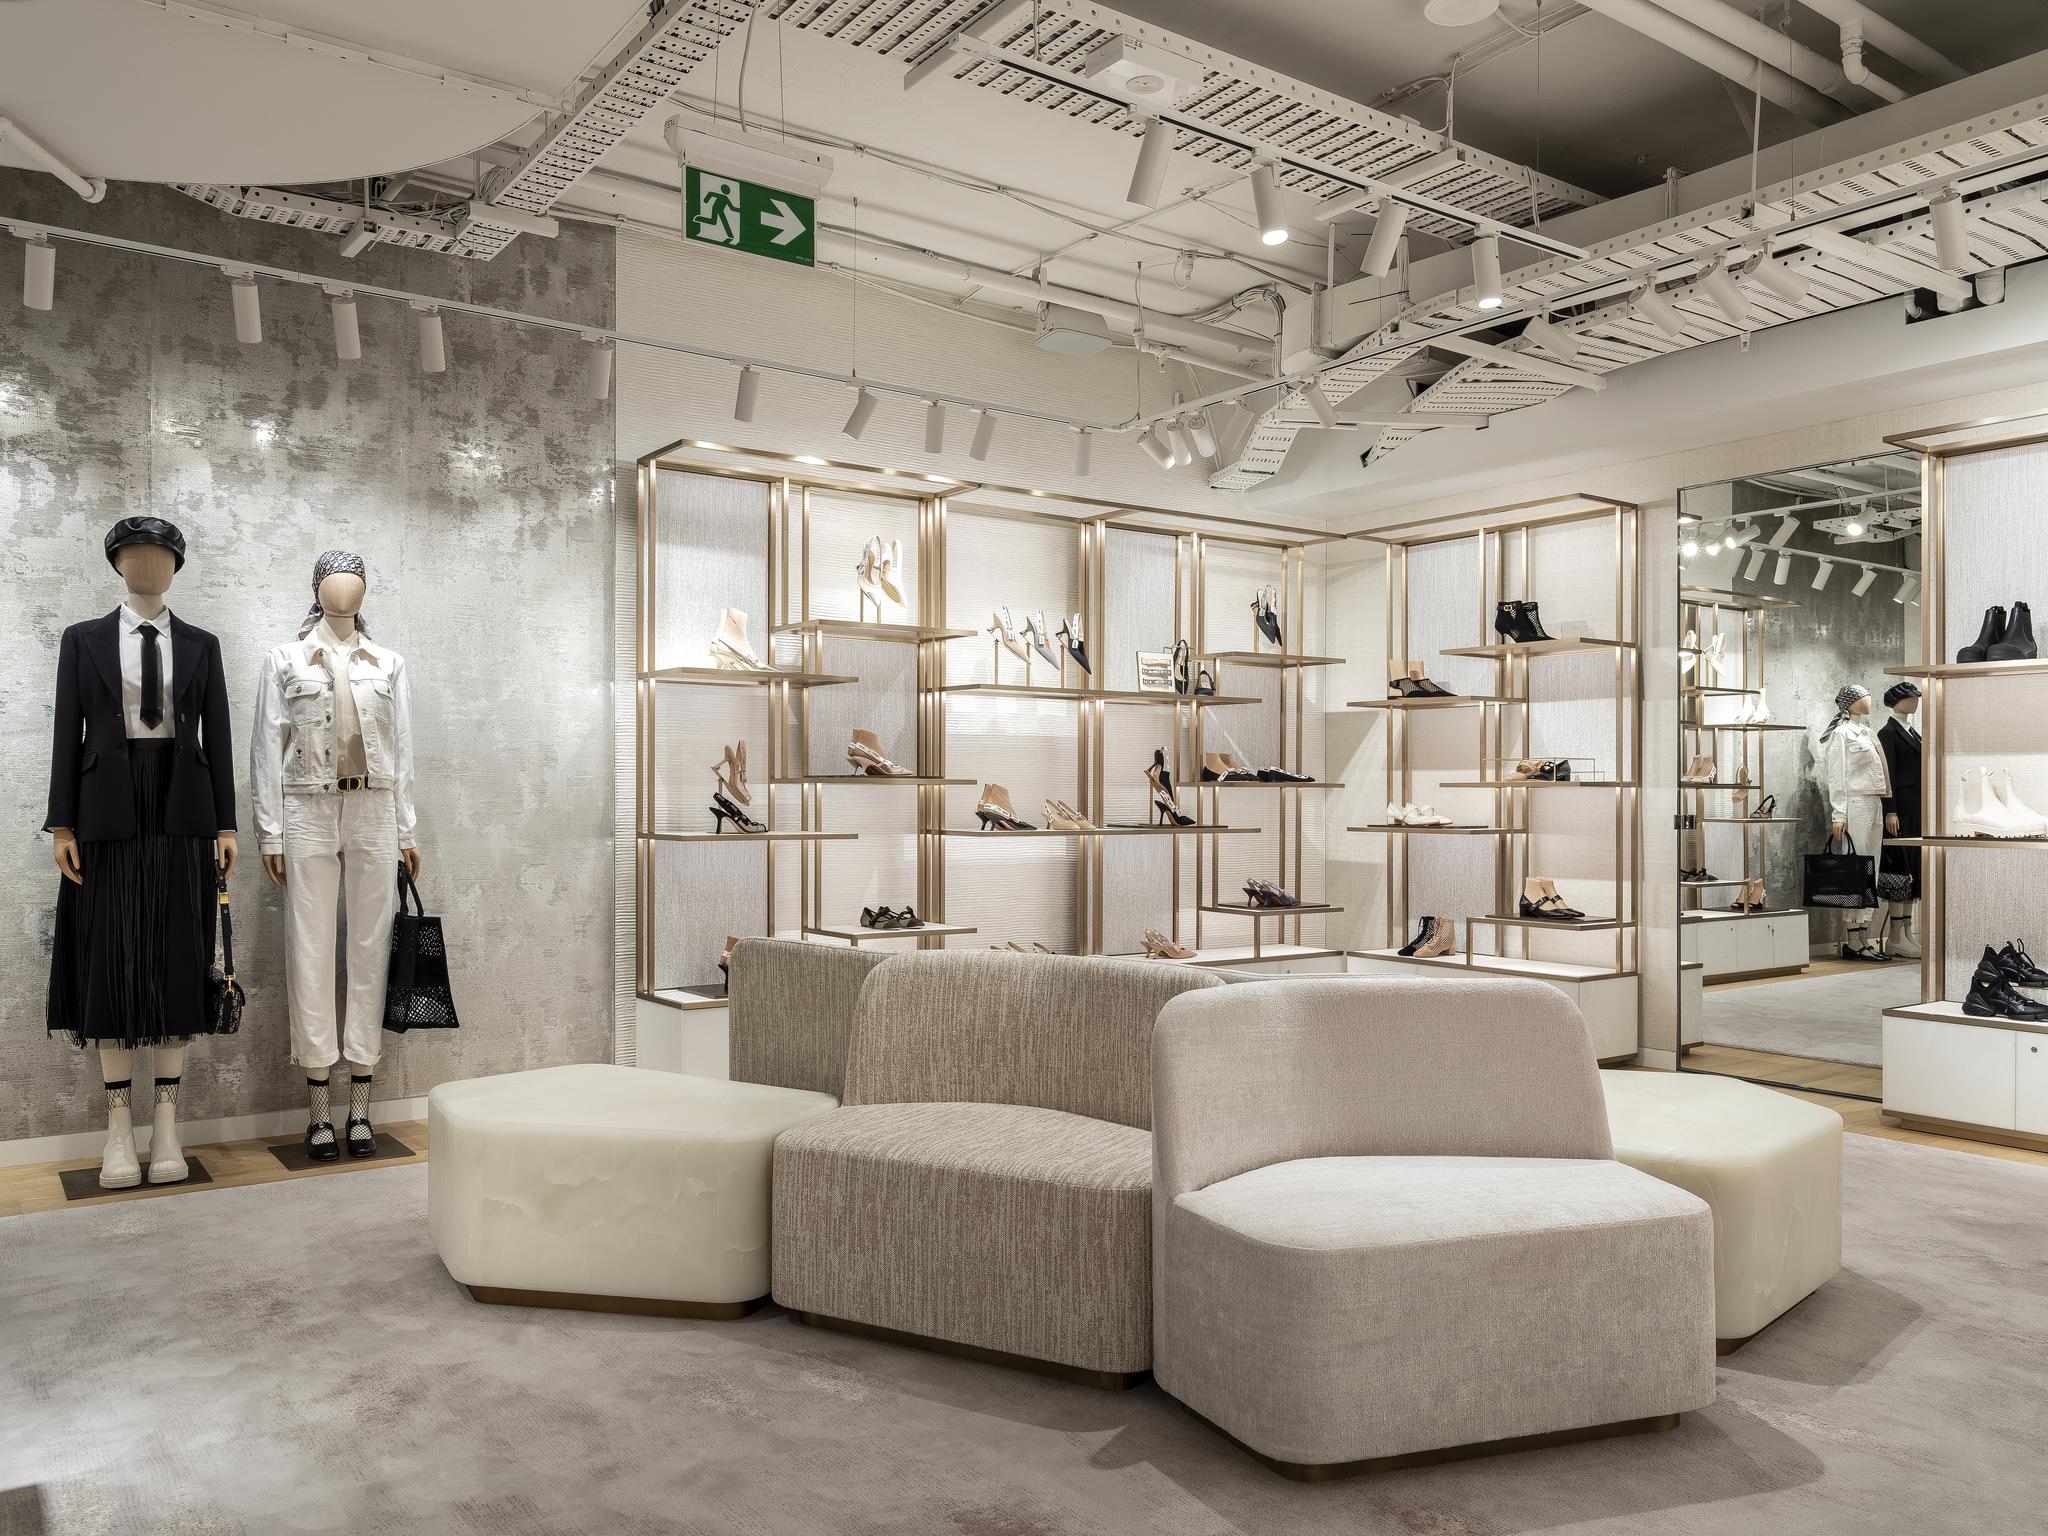 A first look inside Louis Vuitton's redesigned Sydney store